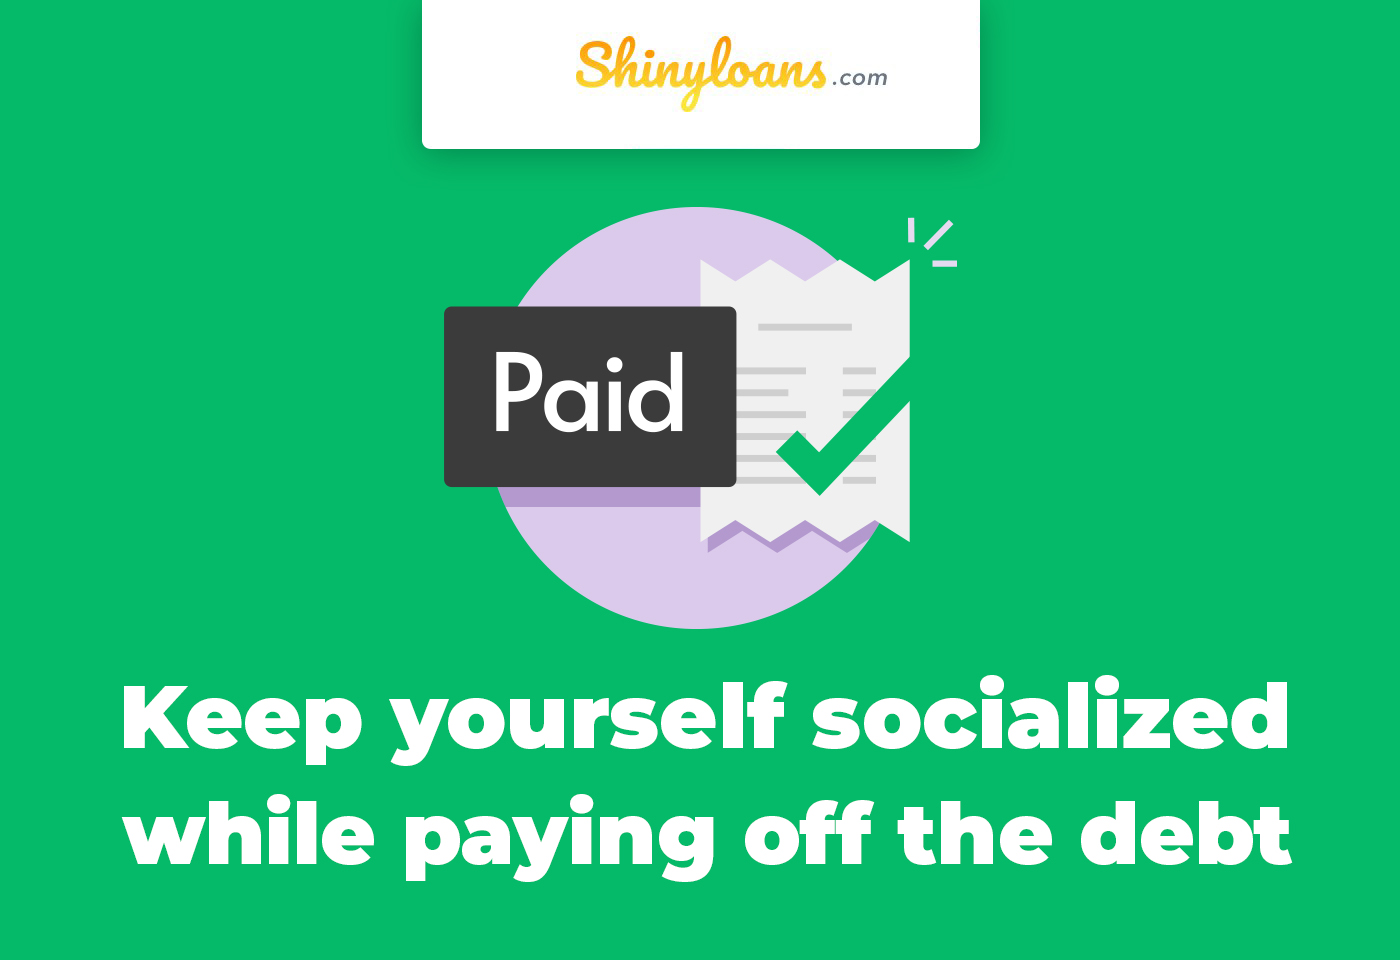 Keep Yourself Socialized While Paying Off the Debt